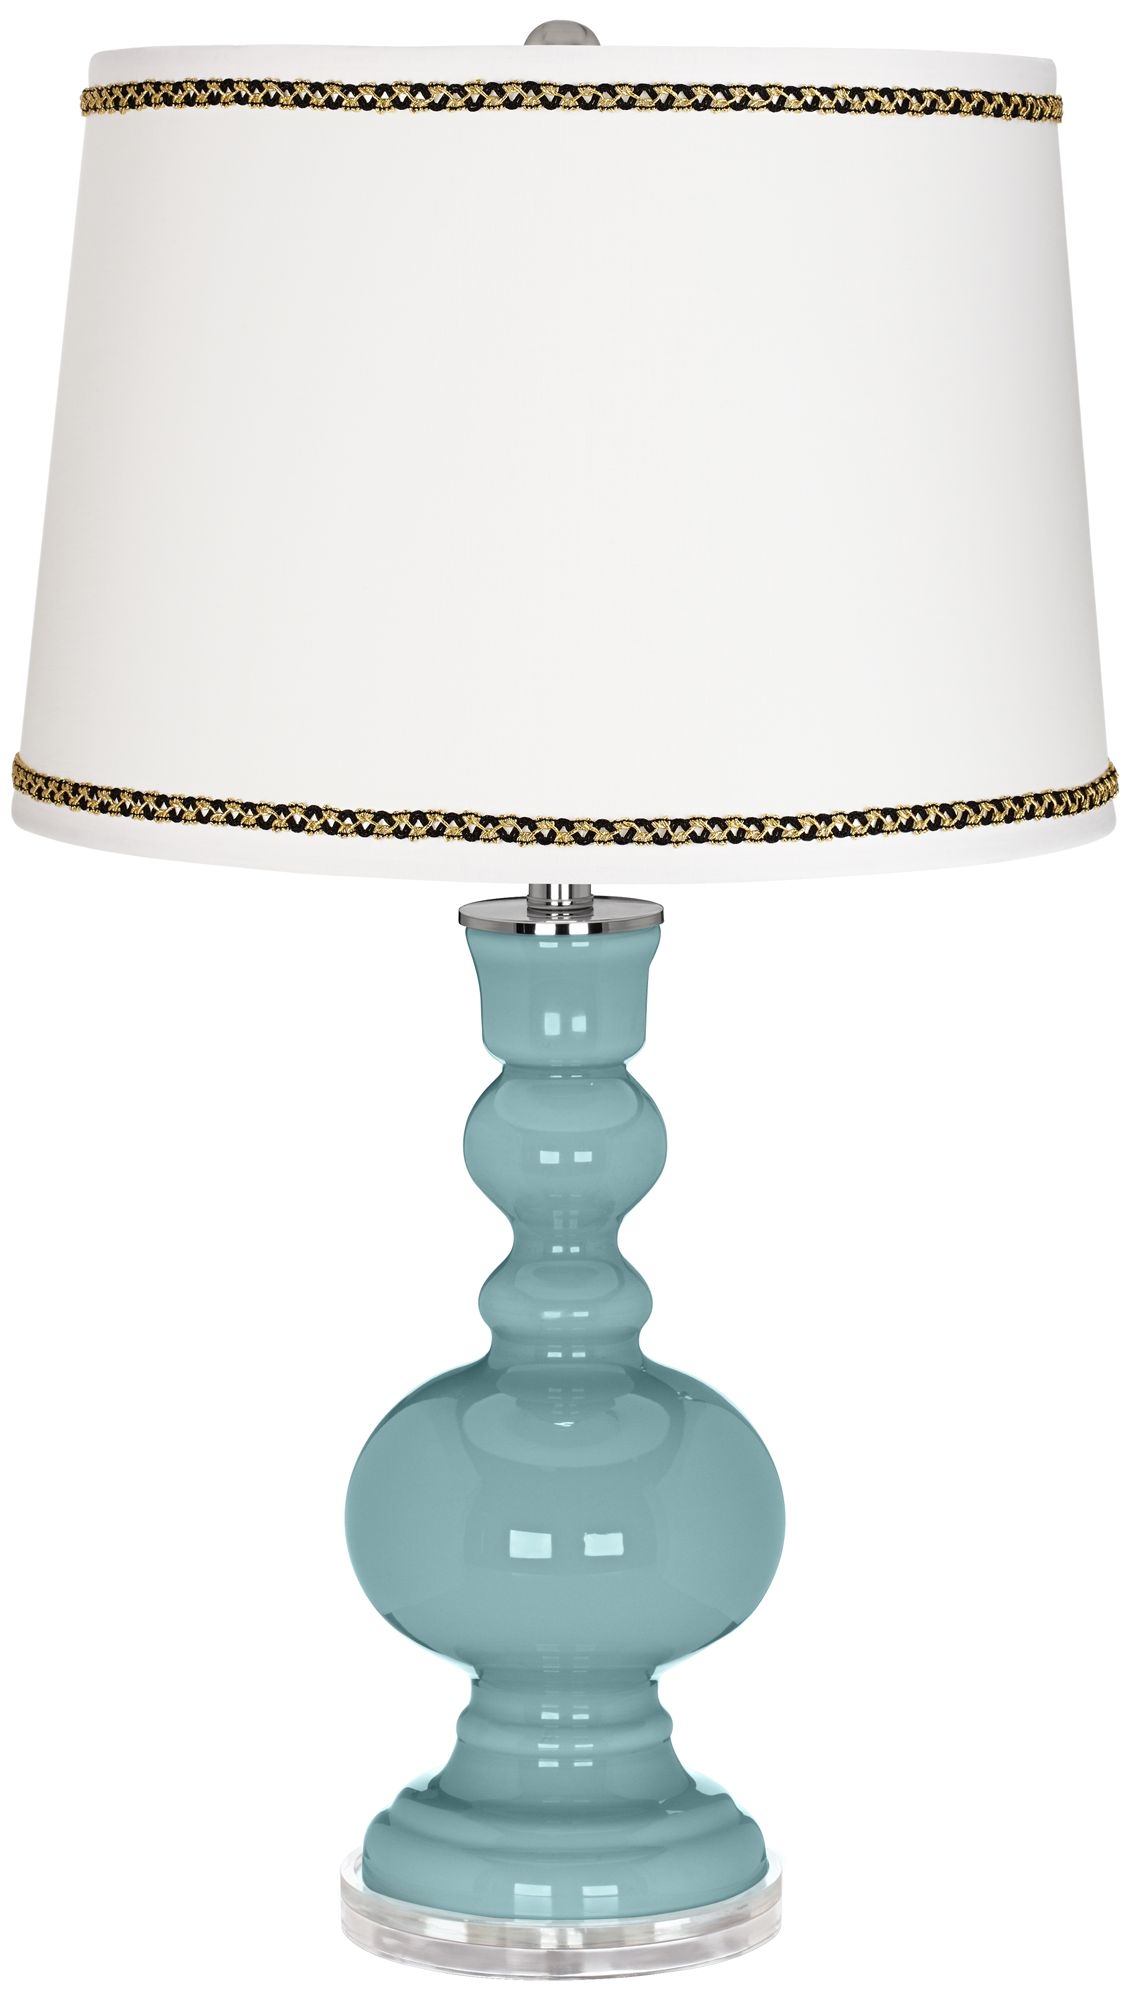 Raindrop Apothecary Table Lamp with Ric-Rac Trim - Image 0